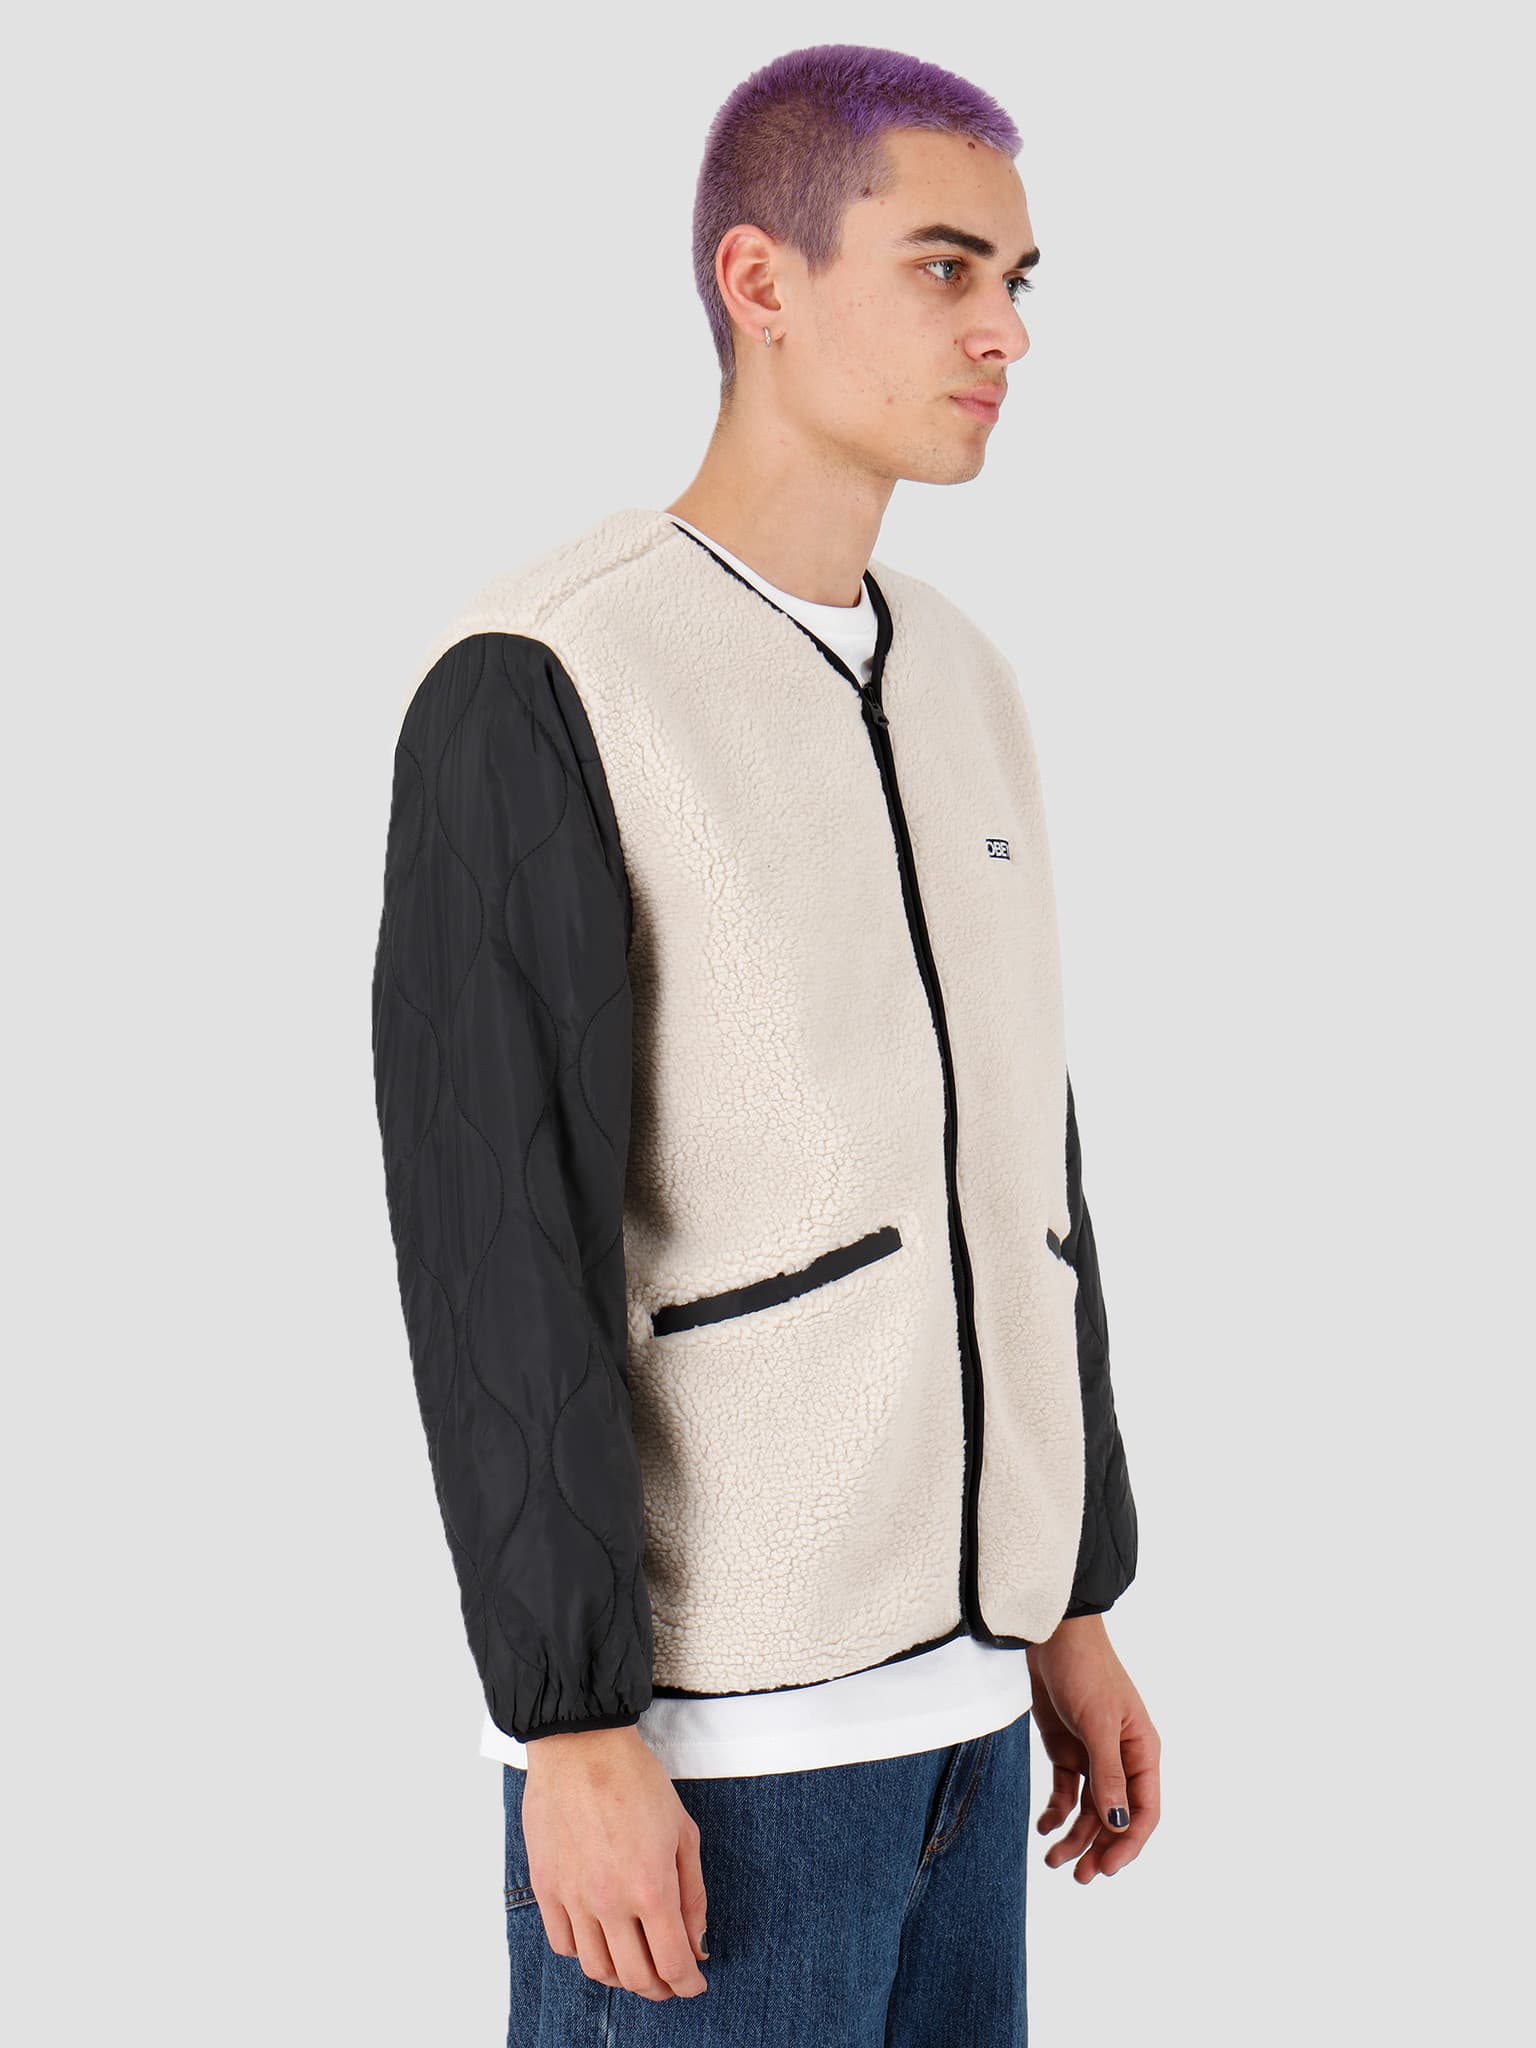 Oyster Jacket Natural Multi 121800407Nml